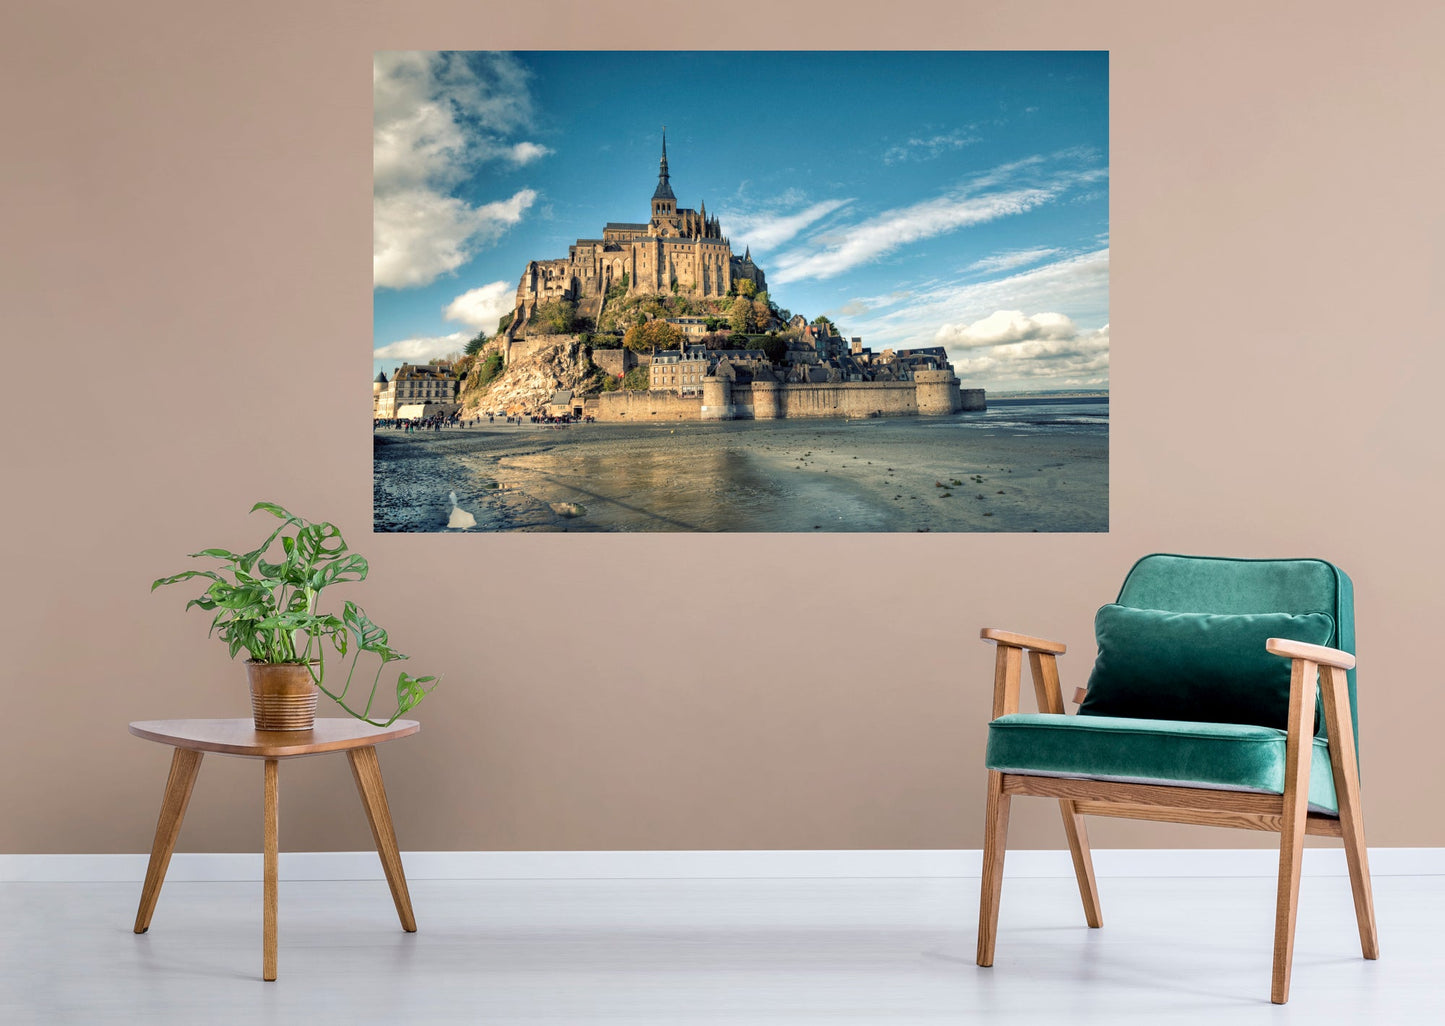 Popular Landmarks: Mont Saint-Michel Realistic Poster - Removable Adhesive Decal